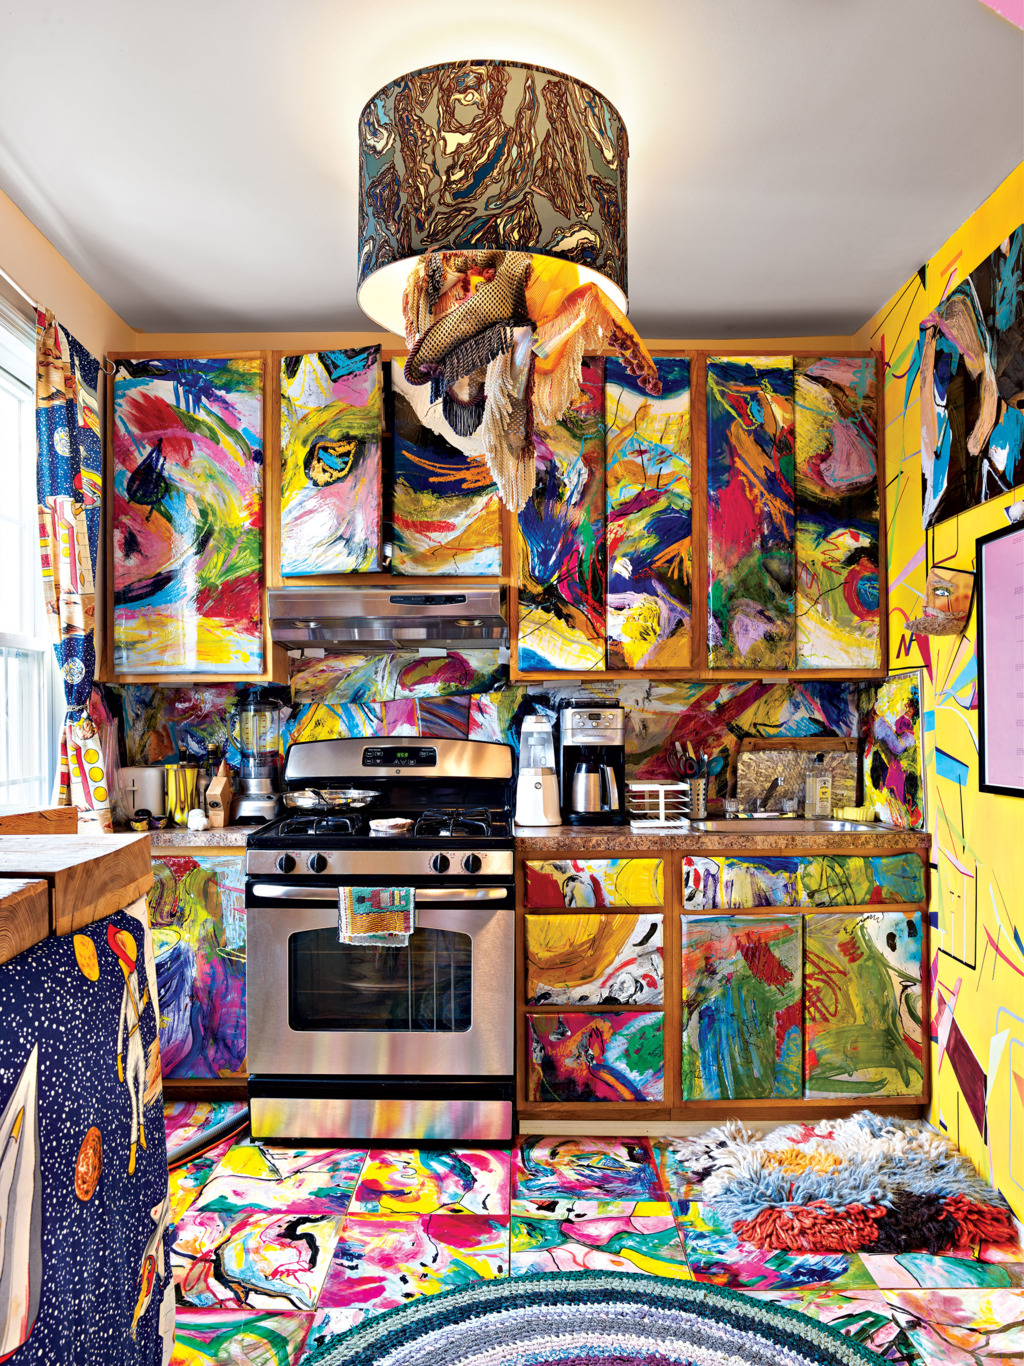 The kitchen looks like a crazy space, all painted bold colors in crazy combos with a waterolor effect